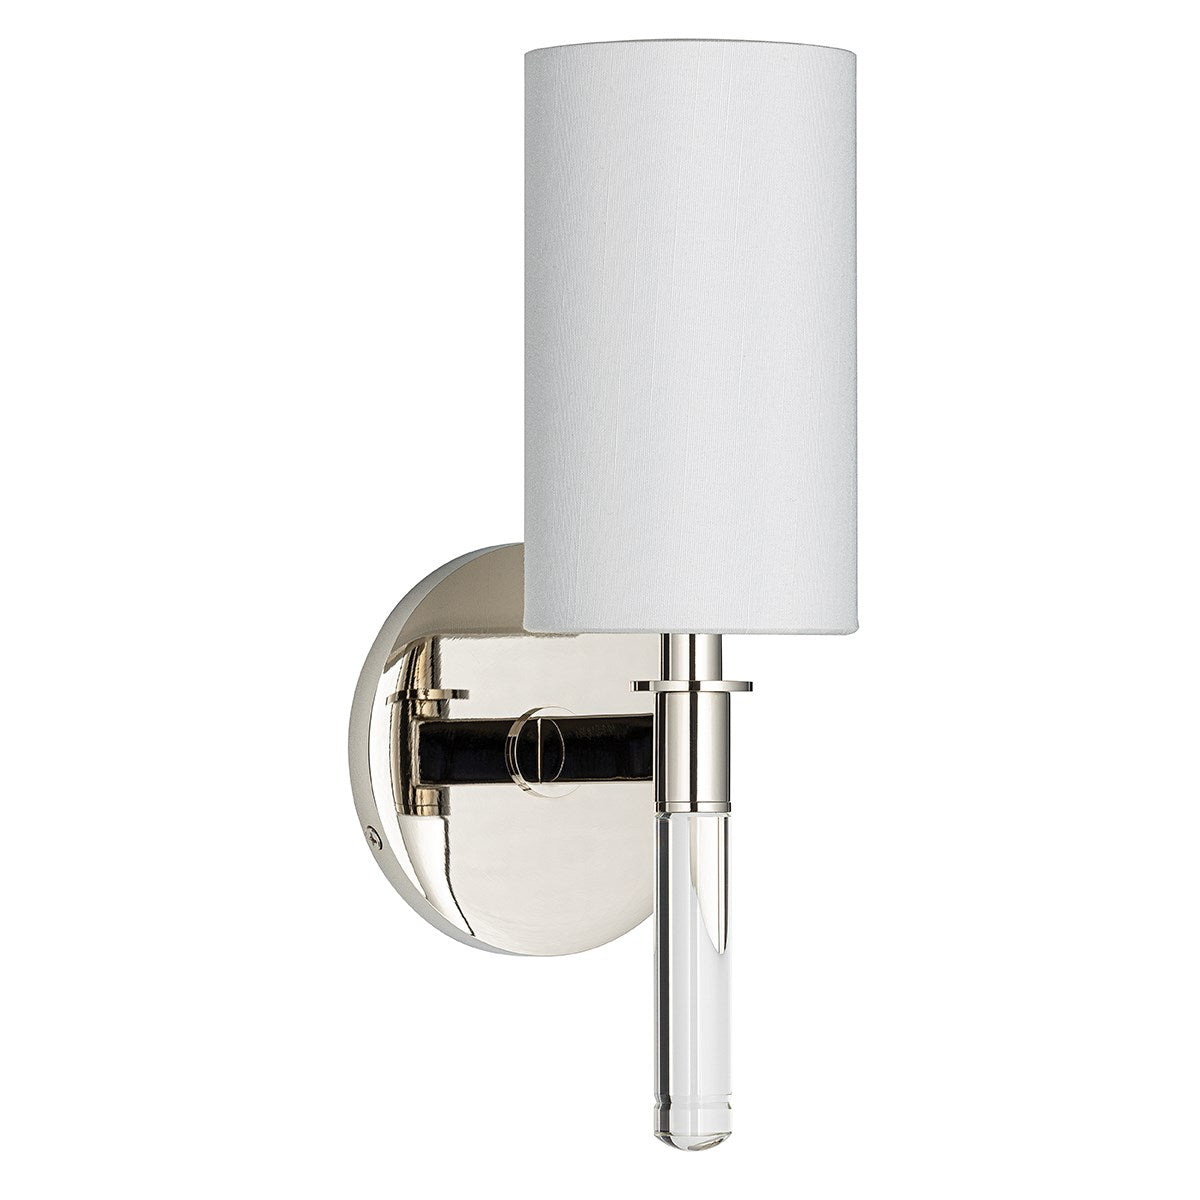 Wylie - 1 LIGHT WALL SCONCE Wall Light Fixtures Hudson Valley Polished Nickel  